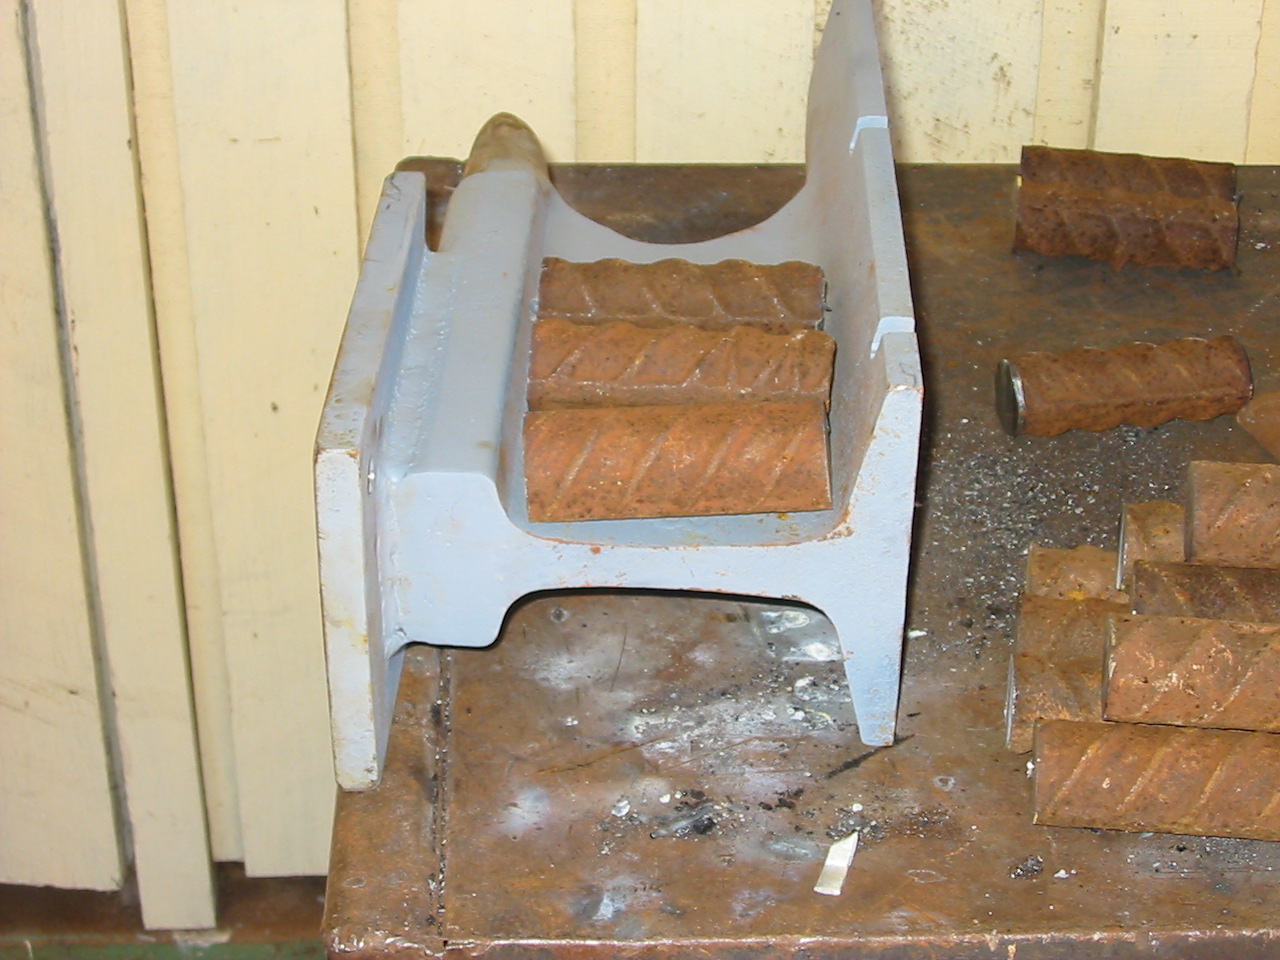 Des' projects or "Musings from the Shed": Homemade Anvil - RR Anvil 